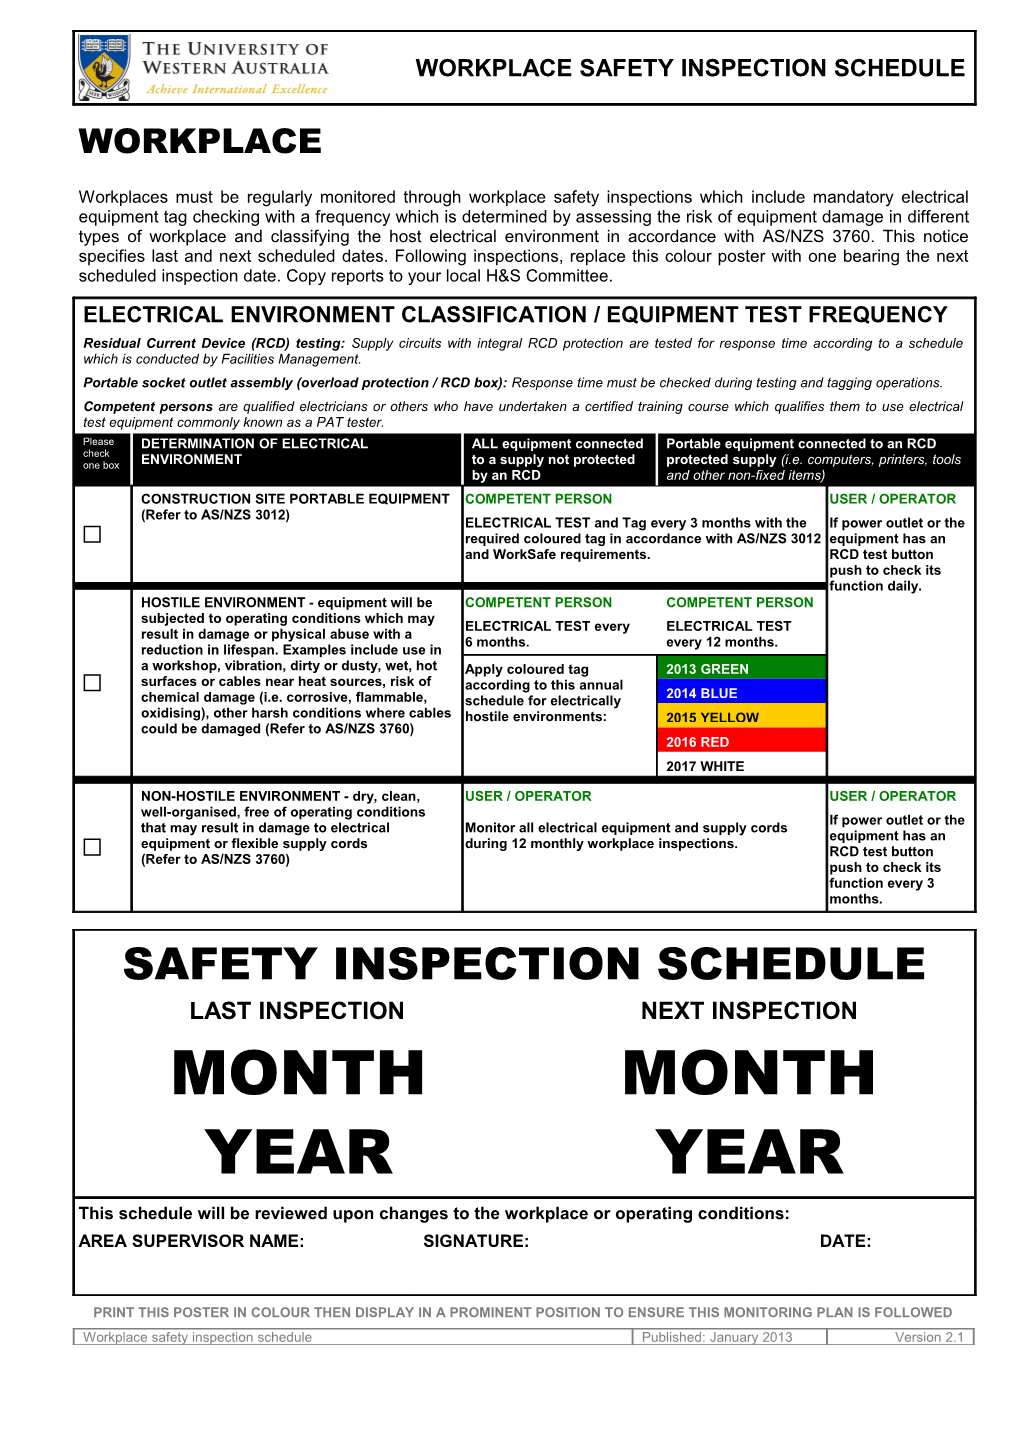 PRINT THIS POSTER in COLOUR Then DISPLAY in a PROMINENT POSITION to ENSURE This MONITORING s1